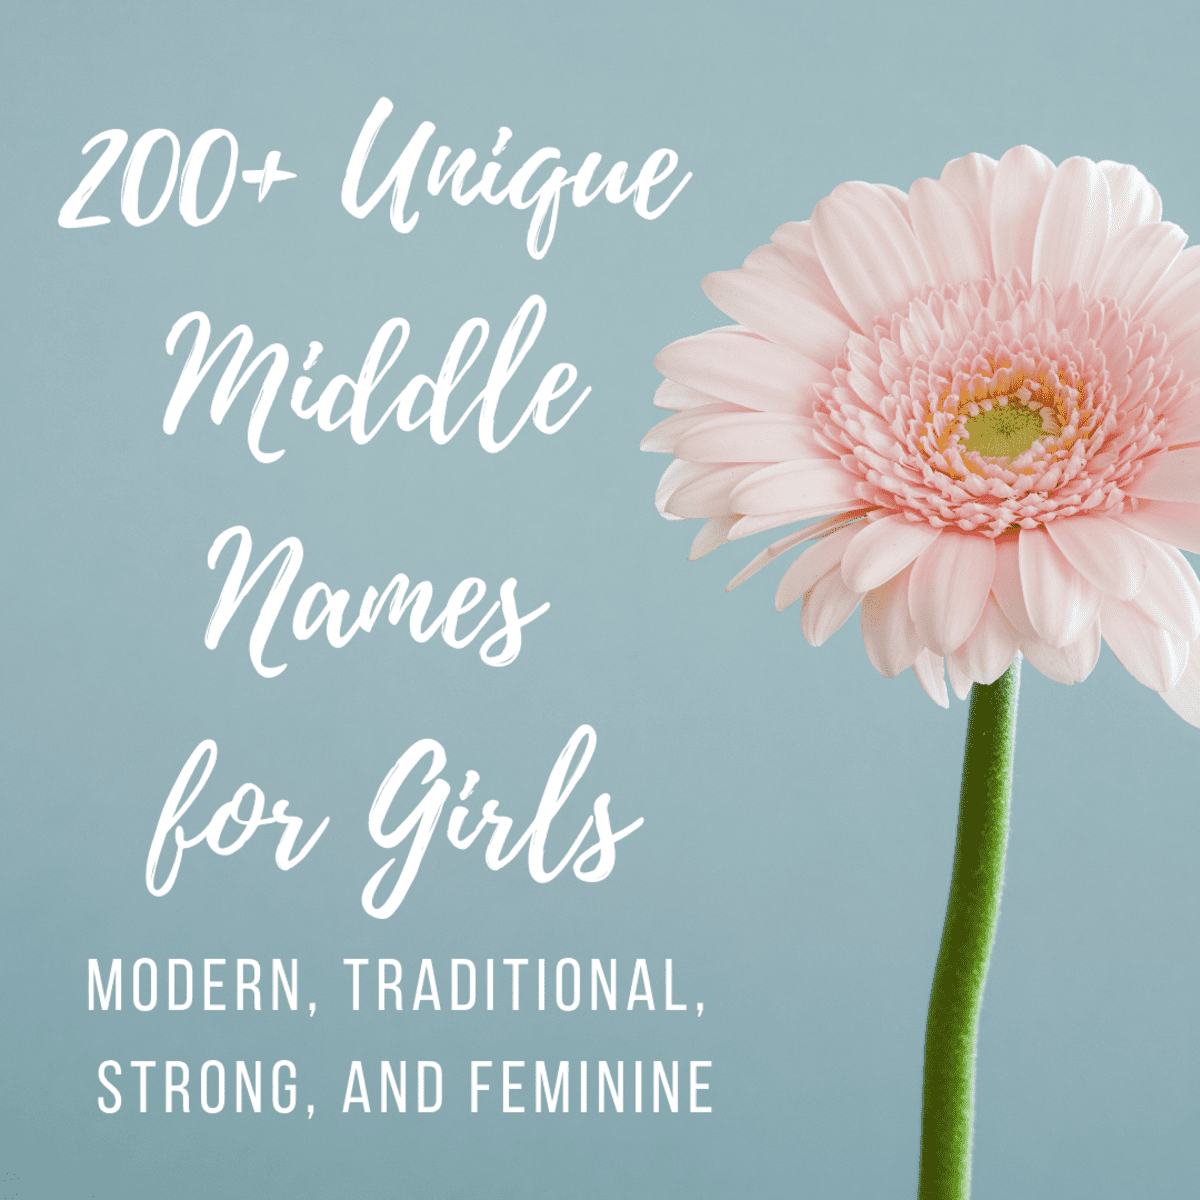 200+ Unique and Meaningful Middle Names for Girls - WeHaveKids